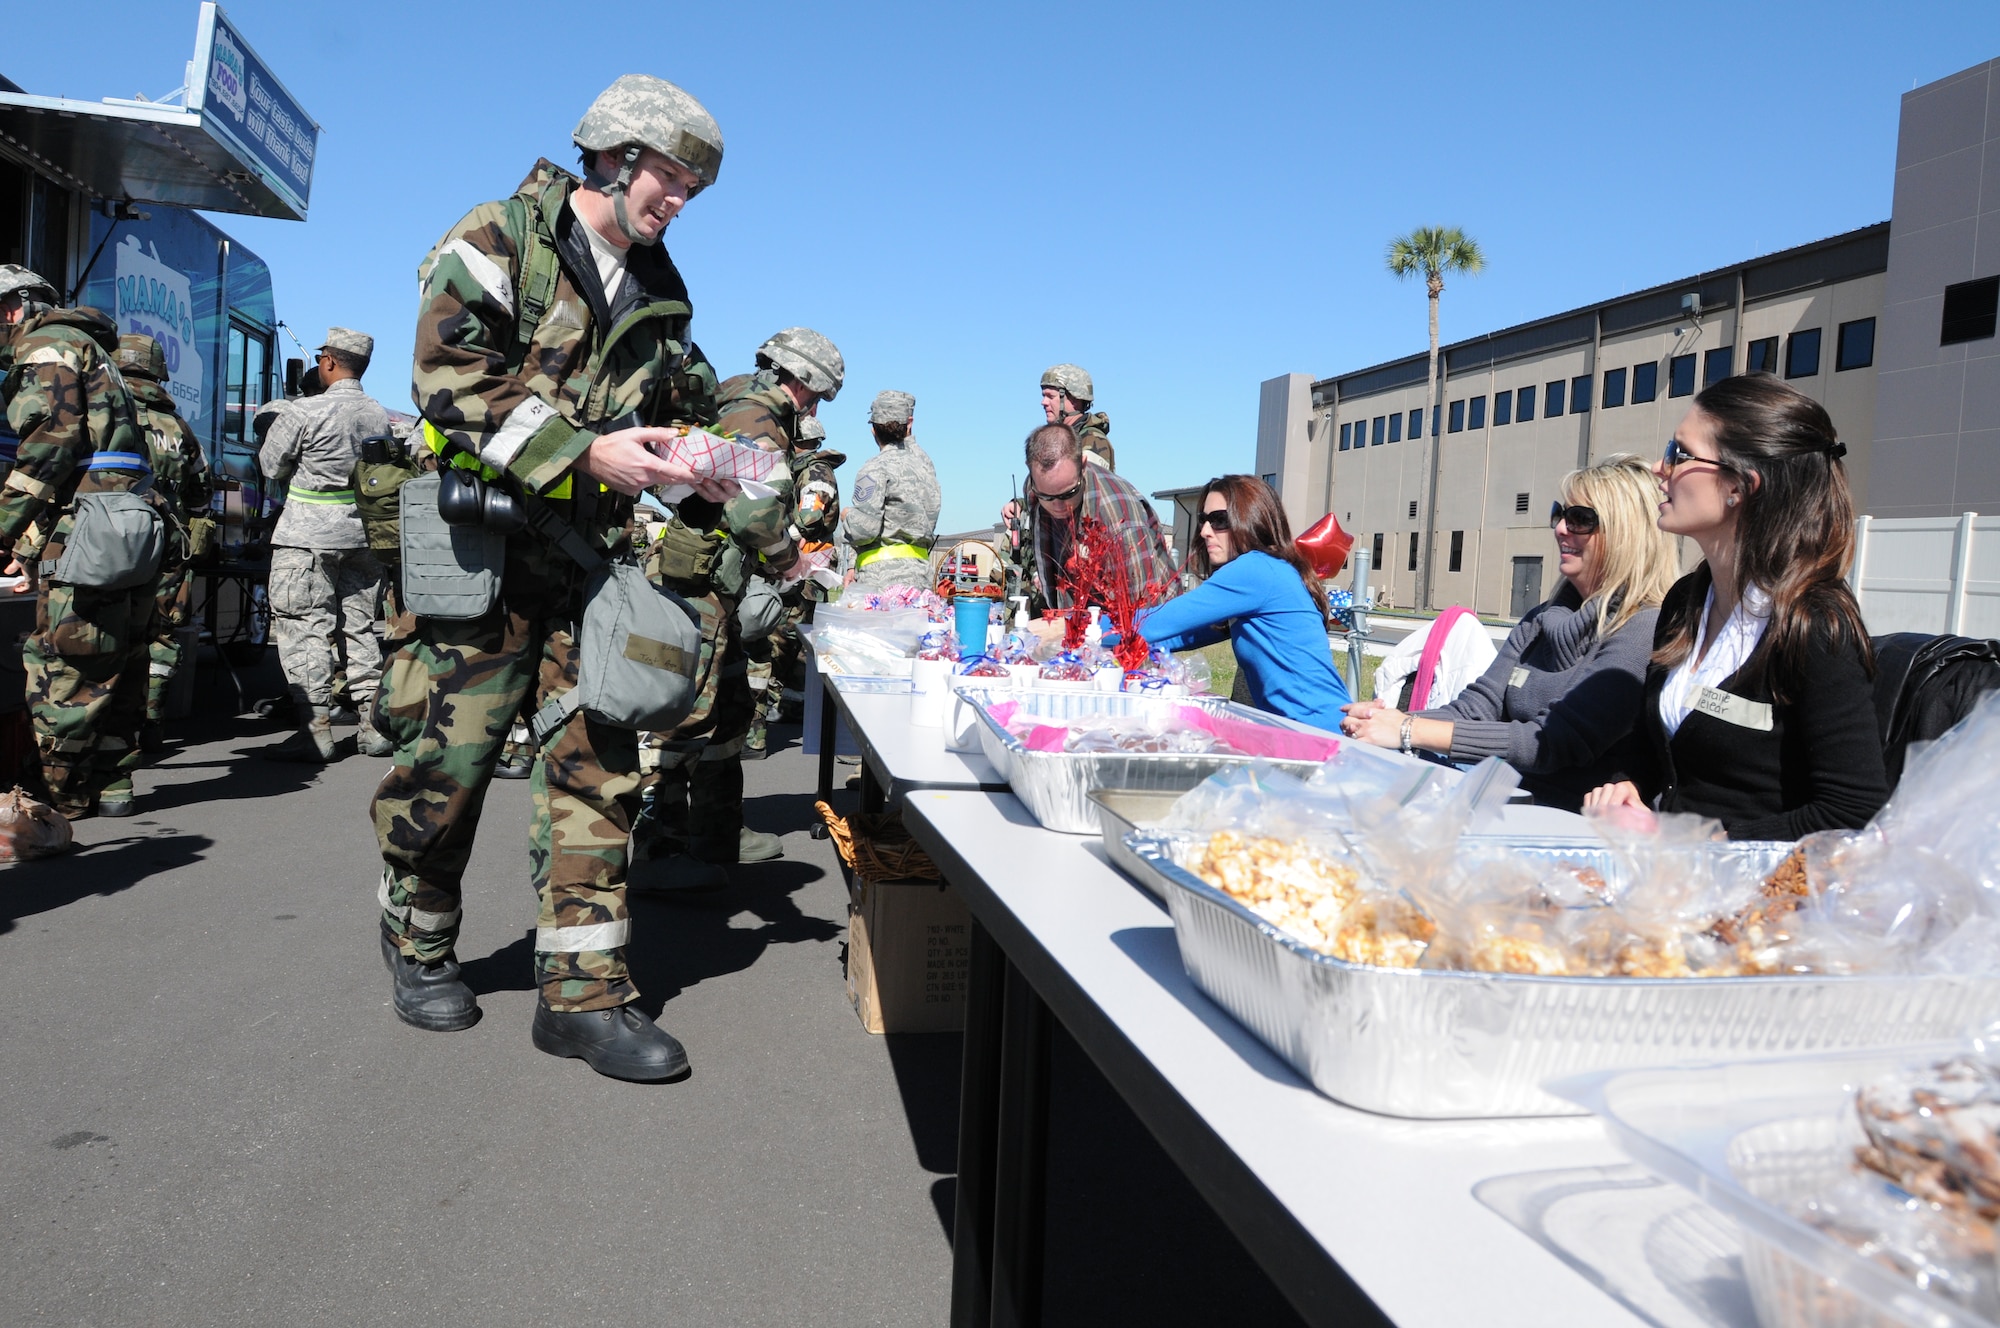 U.S. Air Force Technical Sgt Aron White, Avionics Specialist with the 125th Fighter Wing, Florida Air National Guard takes advantage of great food from local food trucks, and sweet goodies, arranged by the Key Spouse Program during Operation  Eagle Claw a Combat Skills Training Exercise, Jacksonville Fl, February 28, 2014. The ongoing Combat Skills Training ensures the 125th is prepared and ready to defend the State and Nation at all times. (Pictured (U.S. Air National Guard photo by SMSgt Shelley Gill, Released)